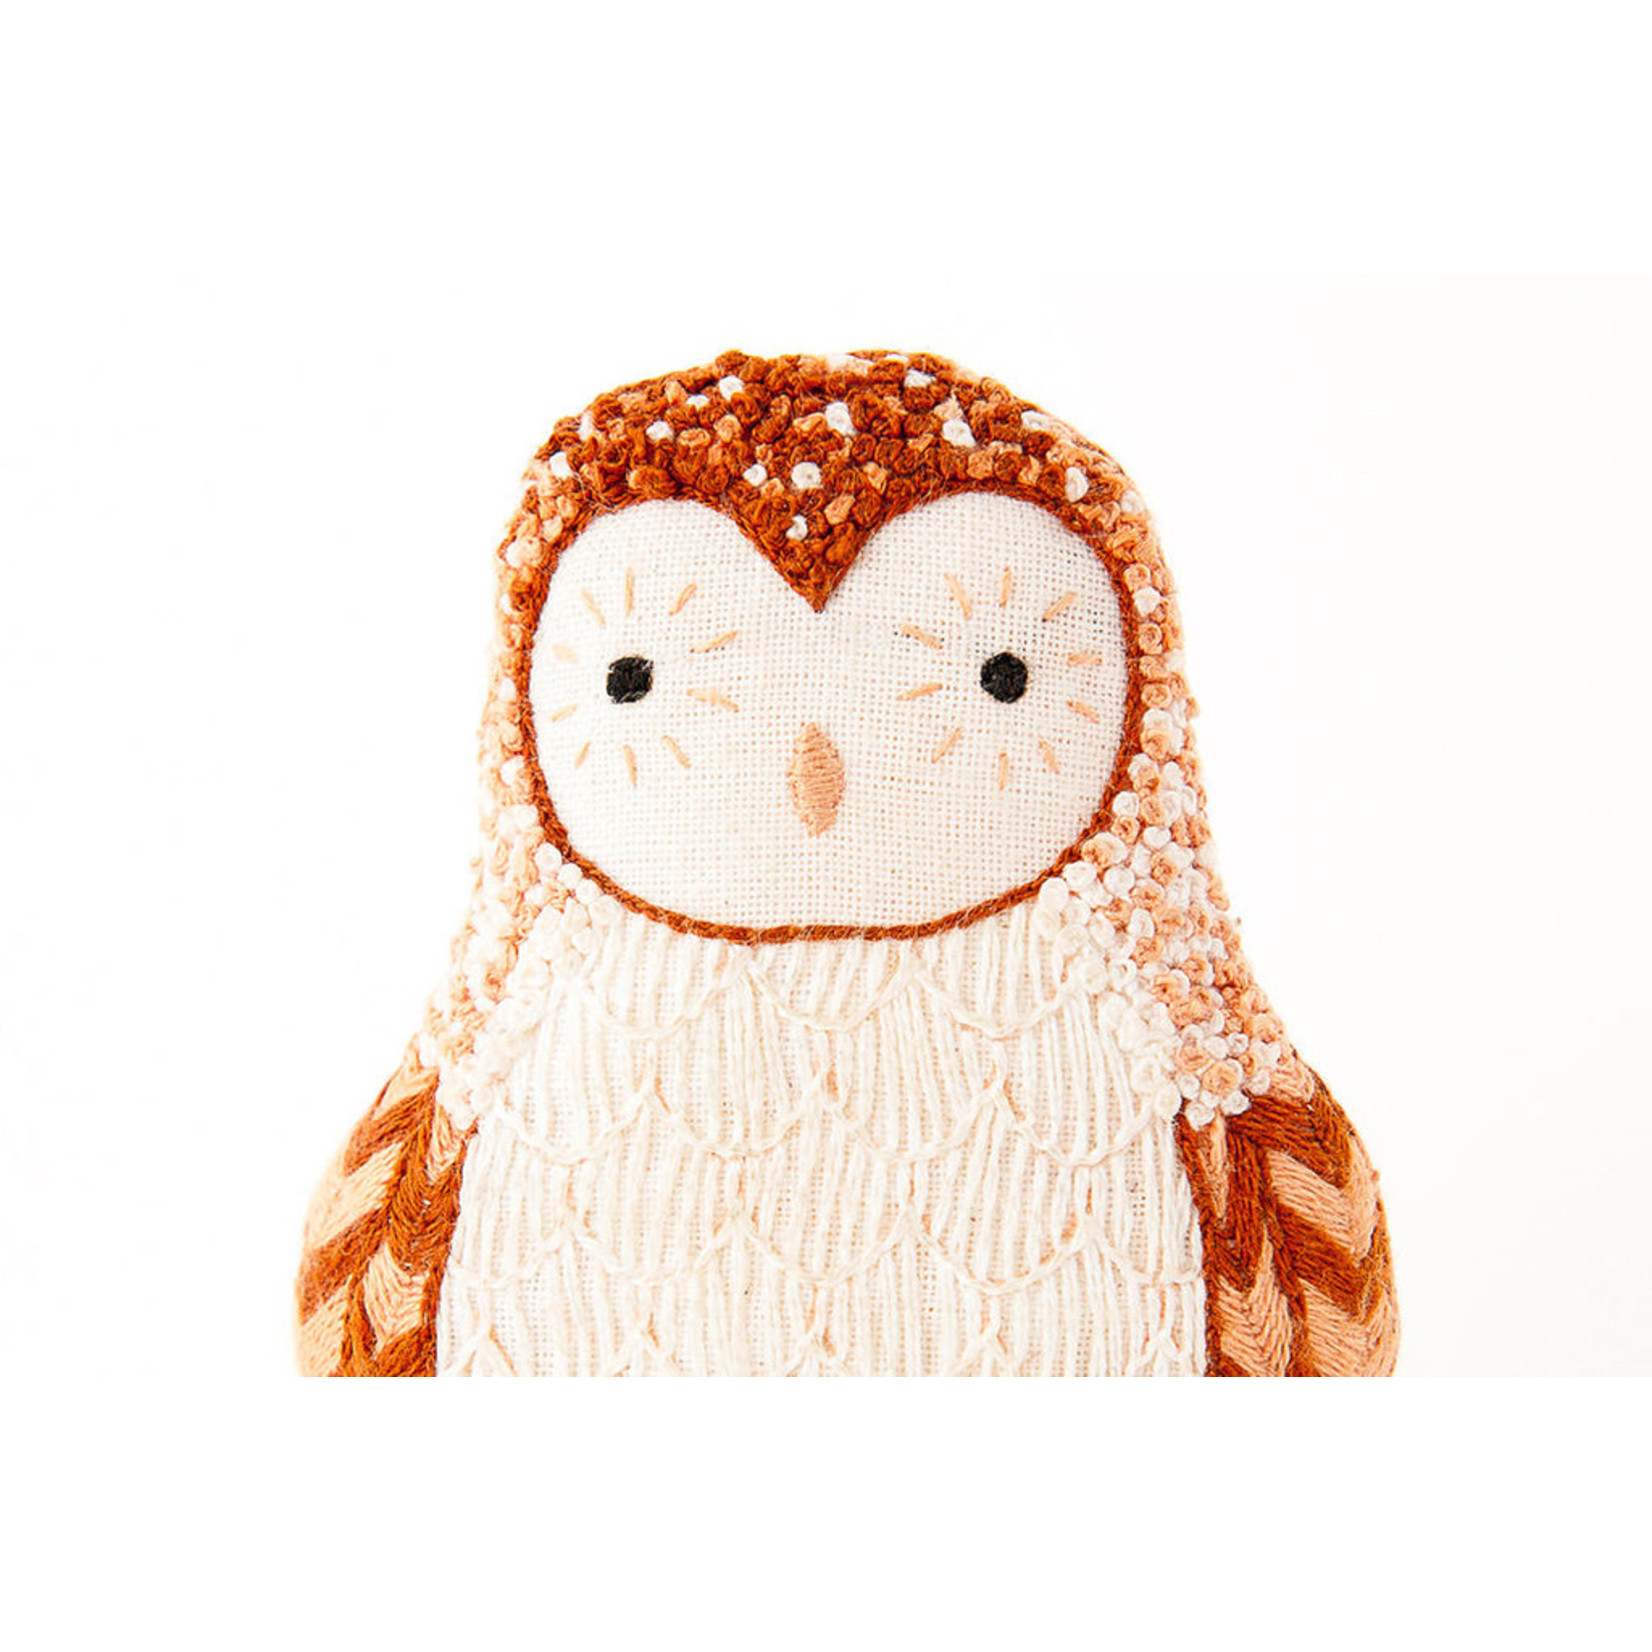 Barn Owl Embroidered Doll Kit - Level 3